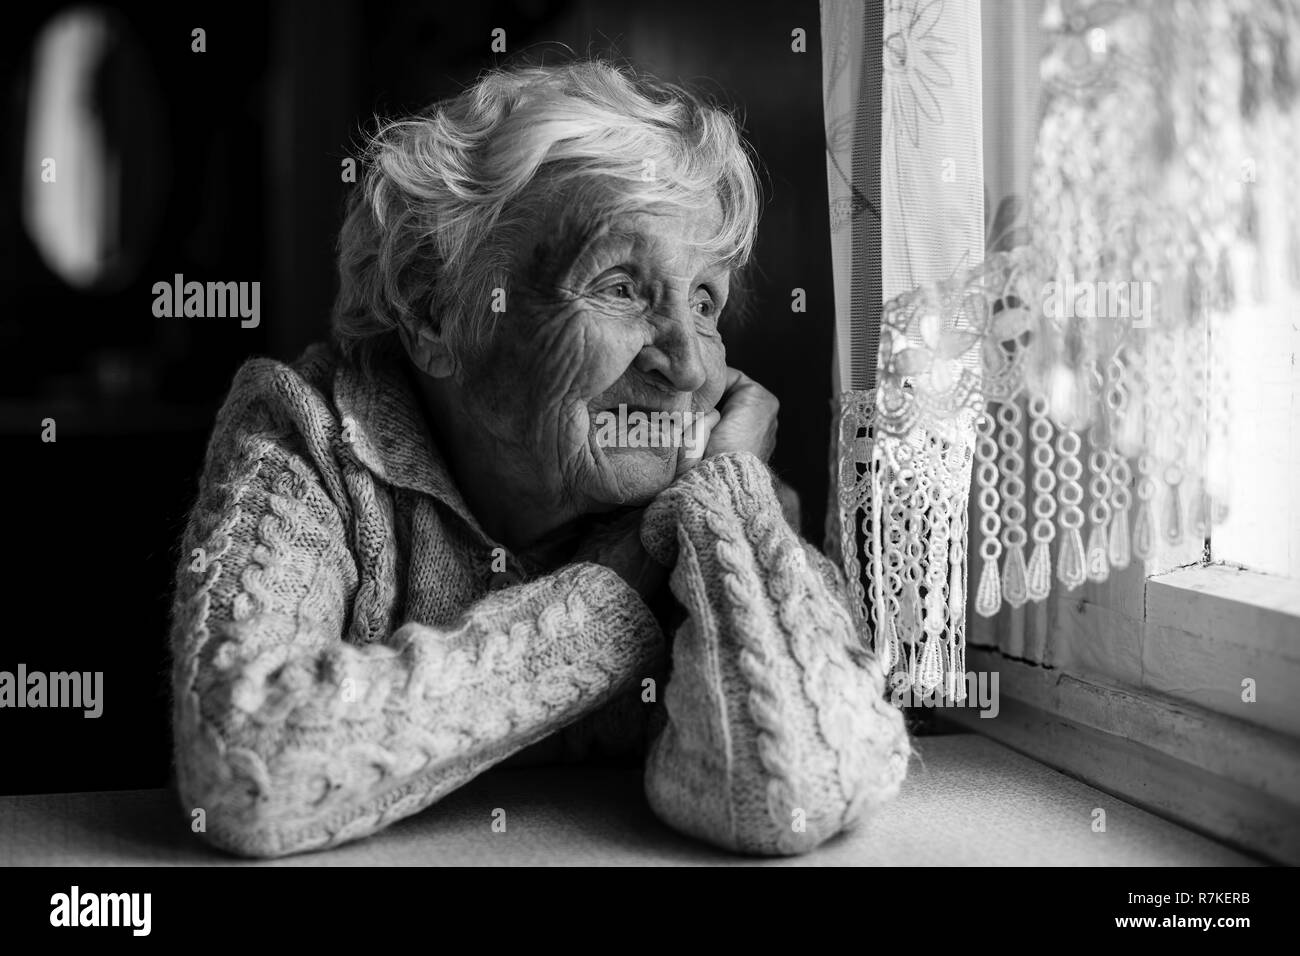 An elderly woman sits and looks out the window. Stock Photo